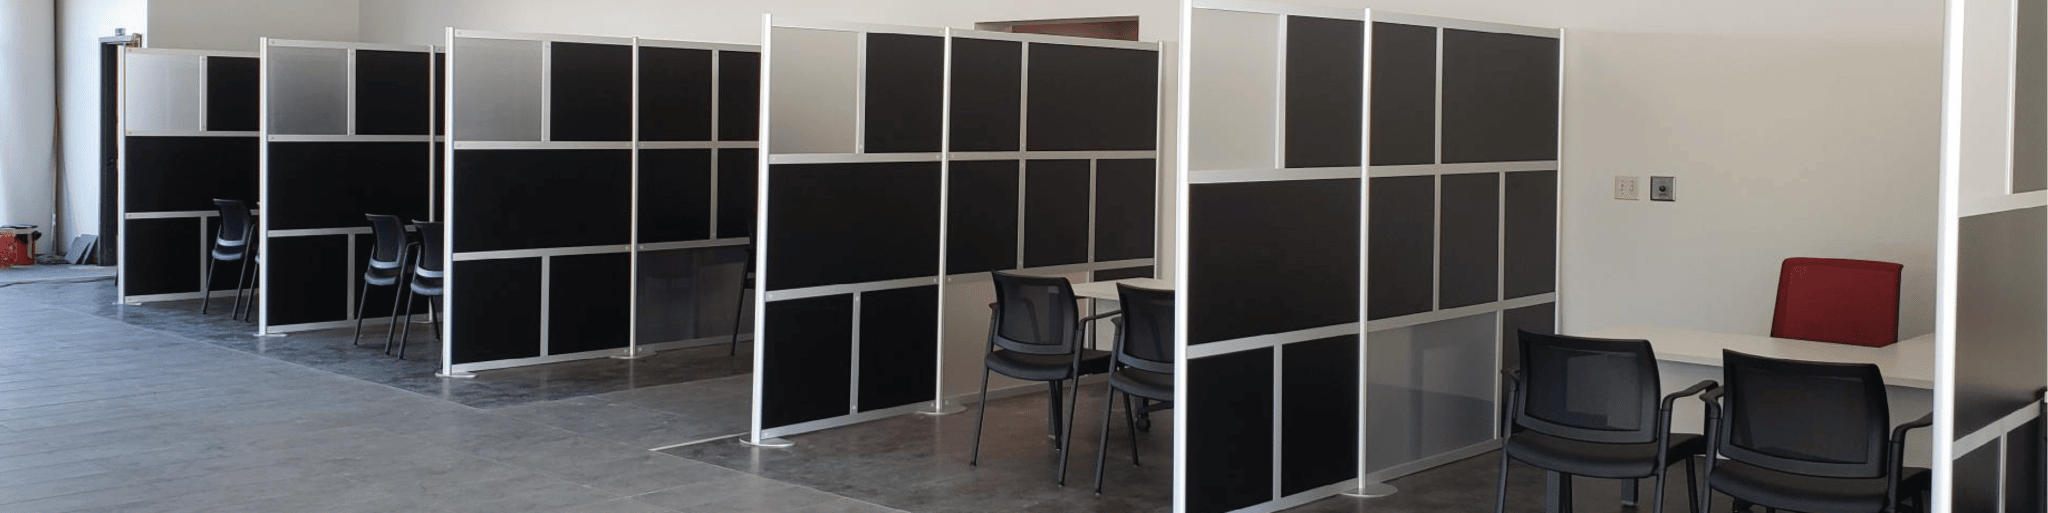 Loftwall Framewalls making small offices in a car dealership